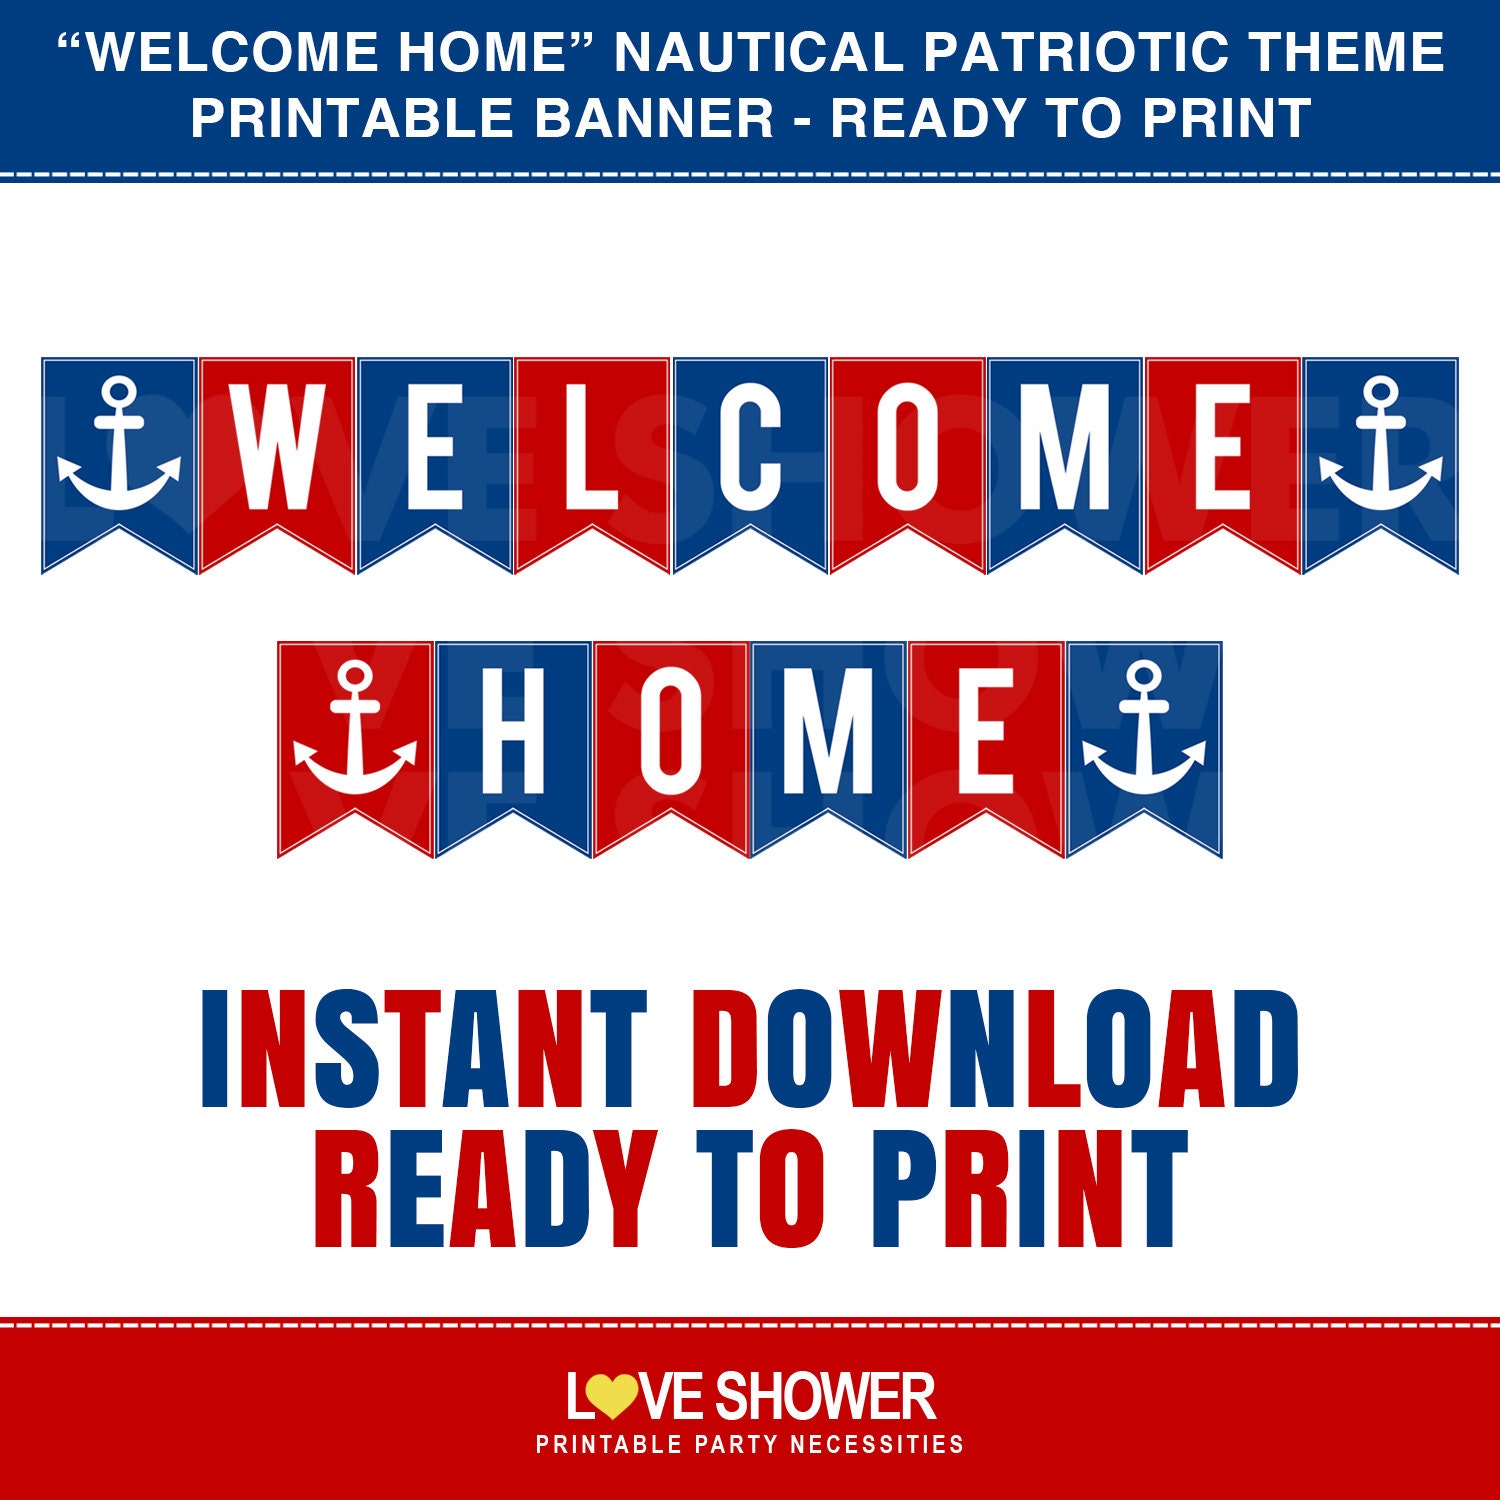 HOME Printable Banner. Red Blue Nautical Patriotic